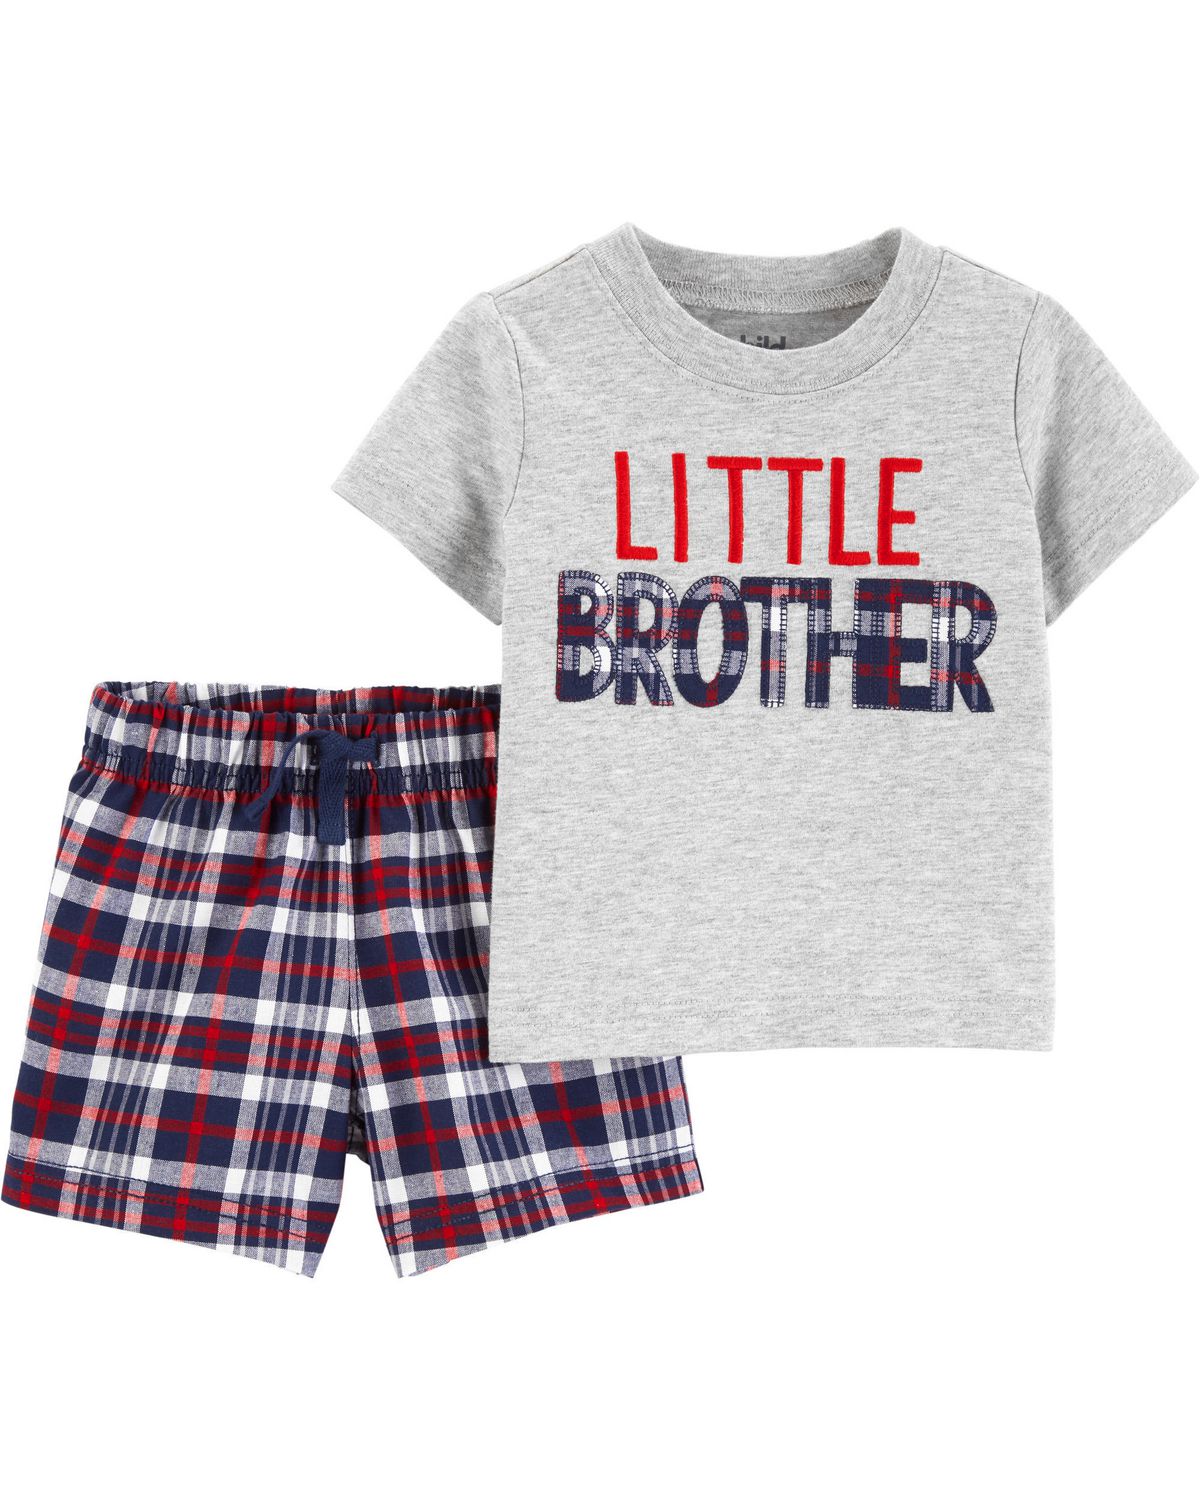 Child of Mine made by Carter's Toddler Boys 2pc set - little brother ...